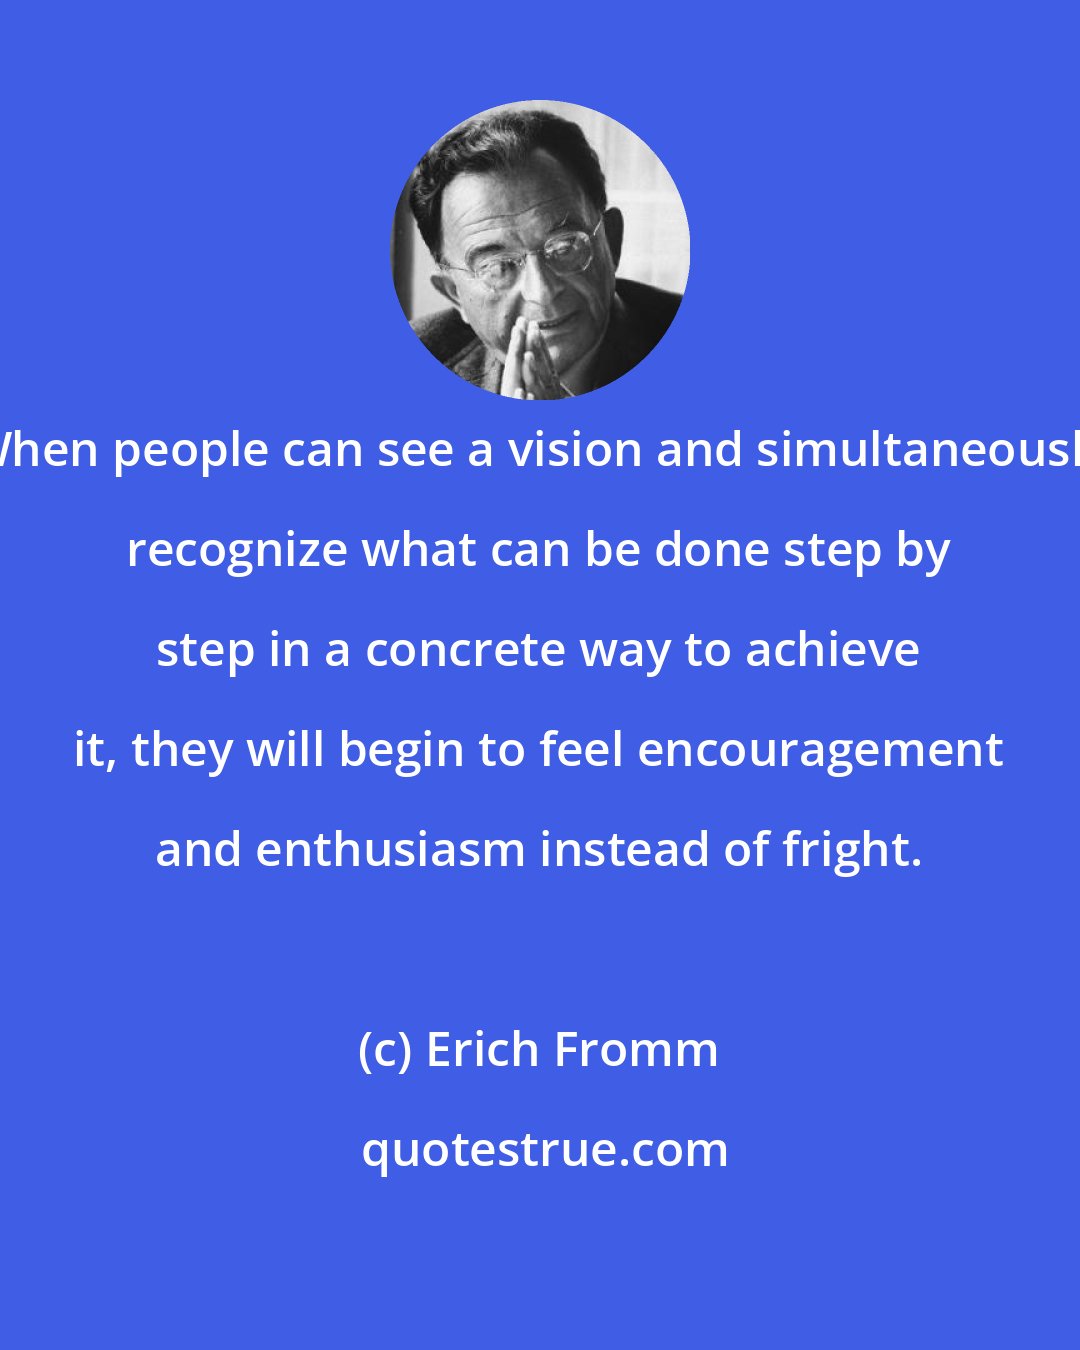 Erich Fromm: When people can see a vision and simultaneously recognize what can be done step by step in a concrete way to achieve it, they will begin to feel encouragement and enthusiasm instead of fright.